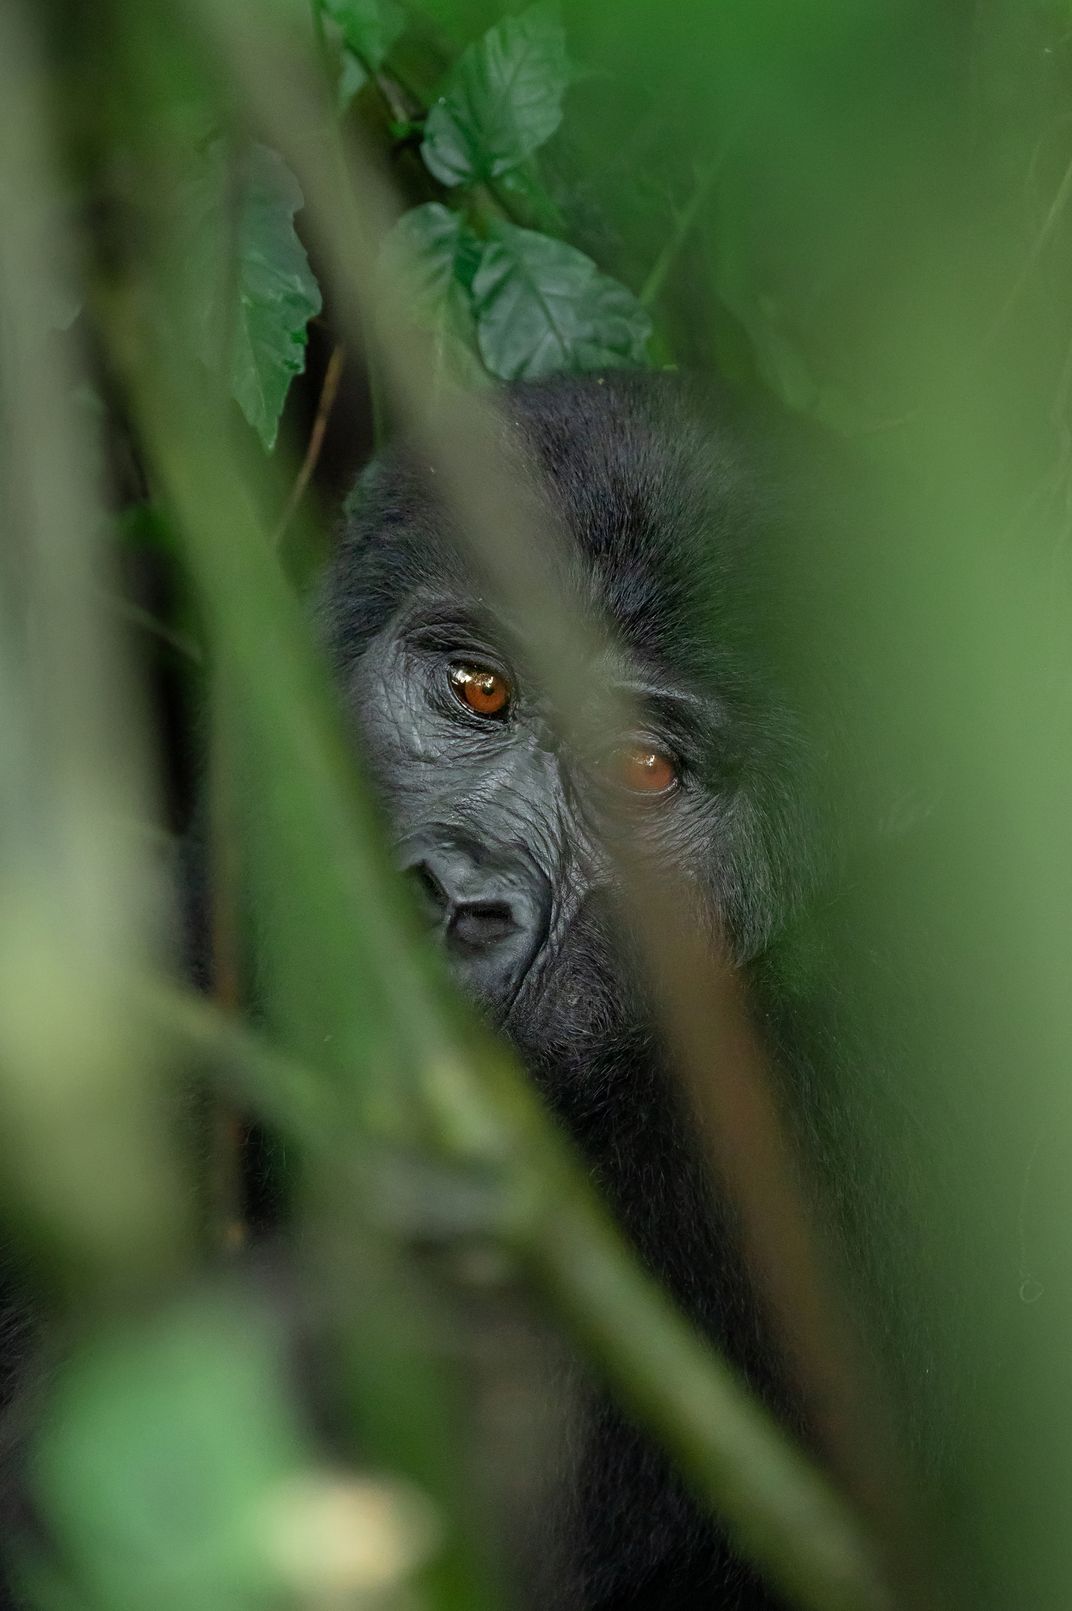 13 - Although their eyes can look almost orange, most gorillas, like this one peeking out from behind branches, have brown eyes.